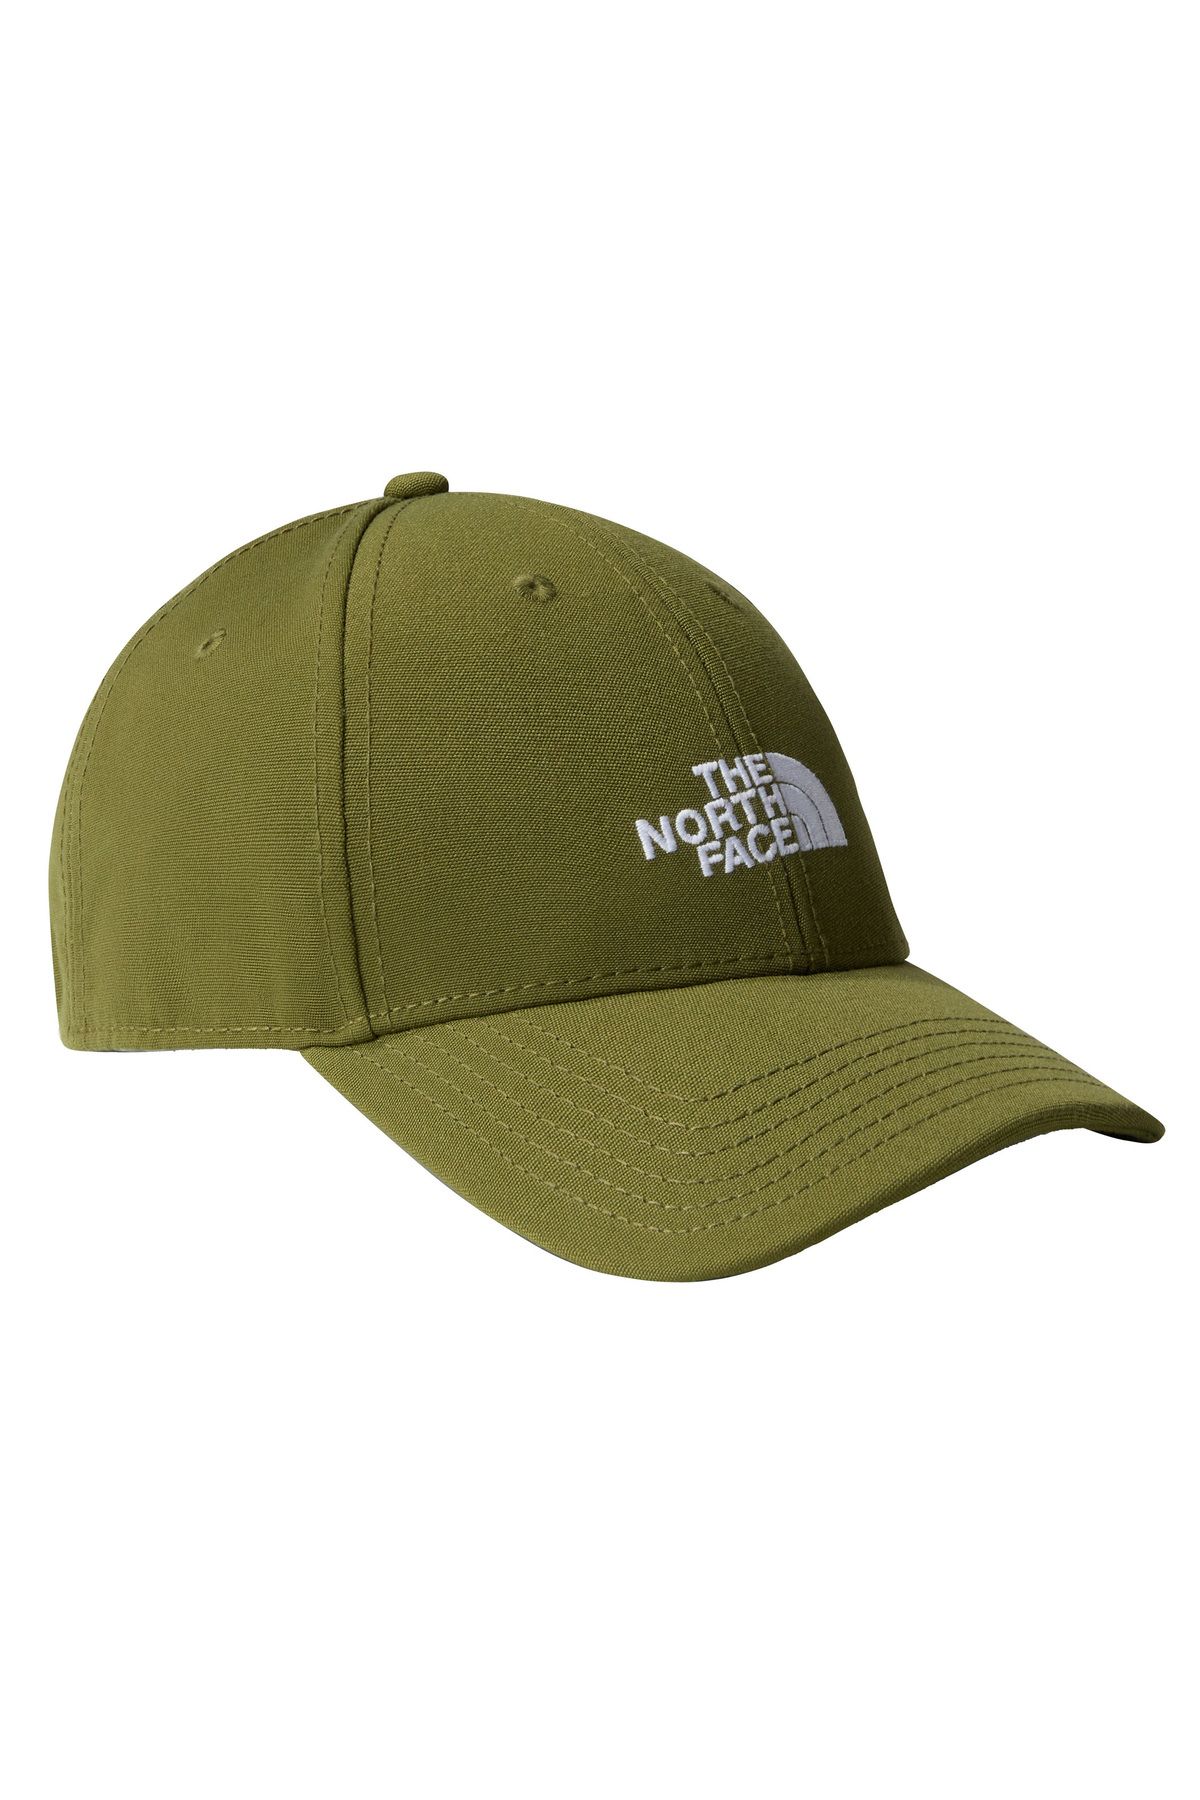 The North Face F0A4VSVPIB1-R The North Face Recycled 66 Classıc Hat Şapka Yeşil